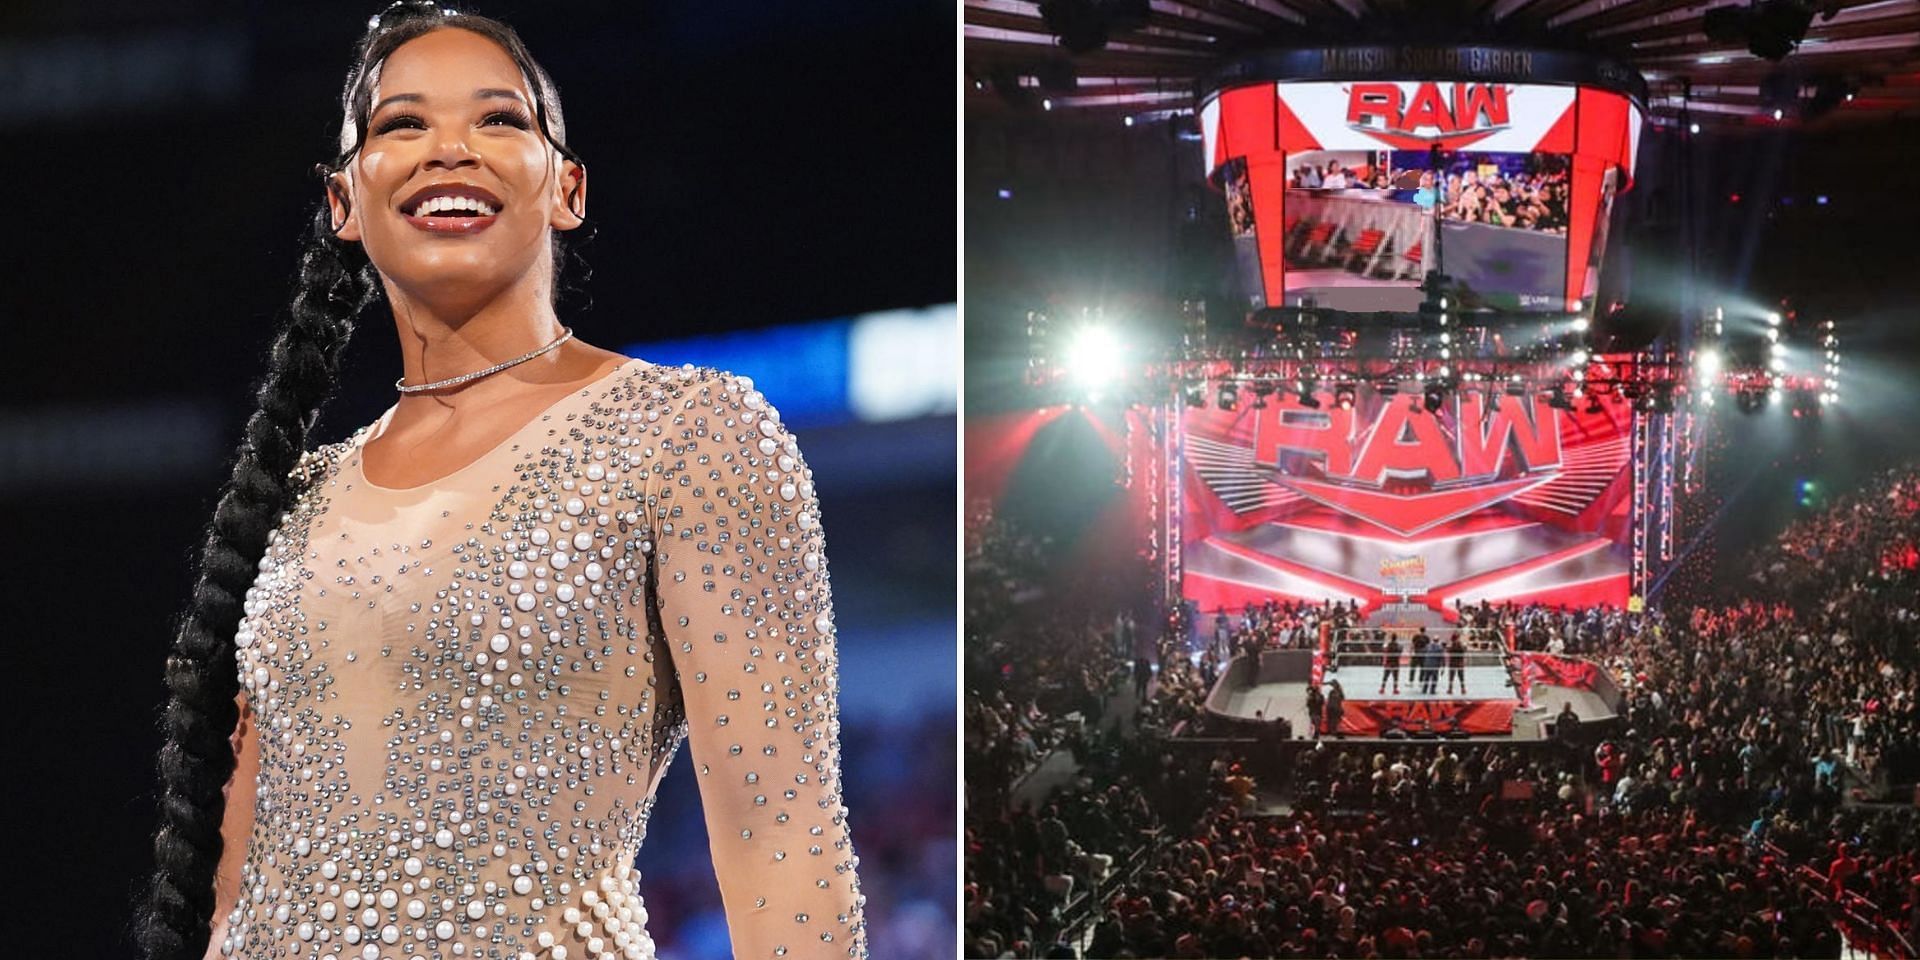 WWE has big plans for Bianca Belair and another star